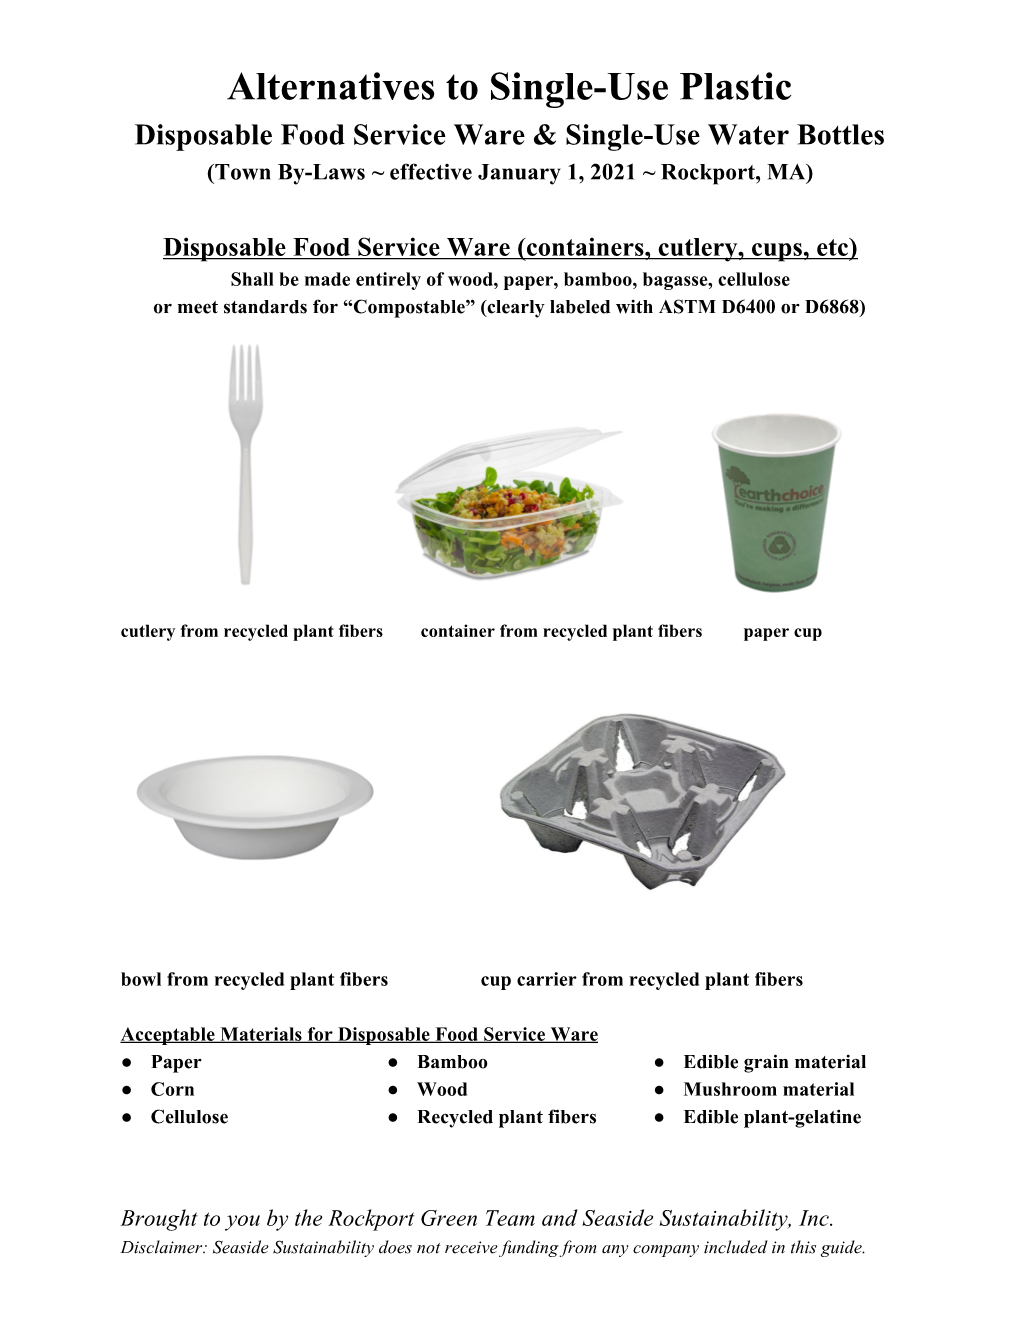 Alternatives to Single-Use Plastic Disposable Food Service Ware & Single-Use Water Bottles (Town By-Laws ~ Effective January 1, 2021 ~ Rockport, MA)